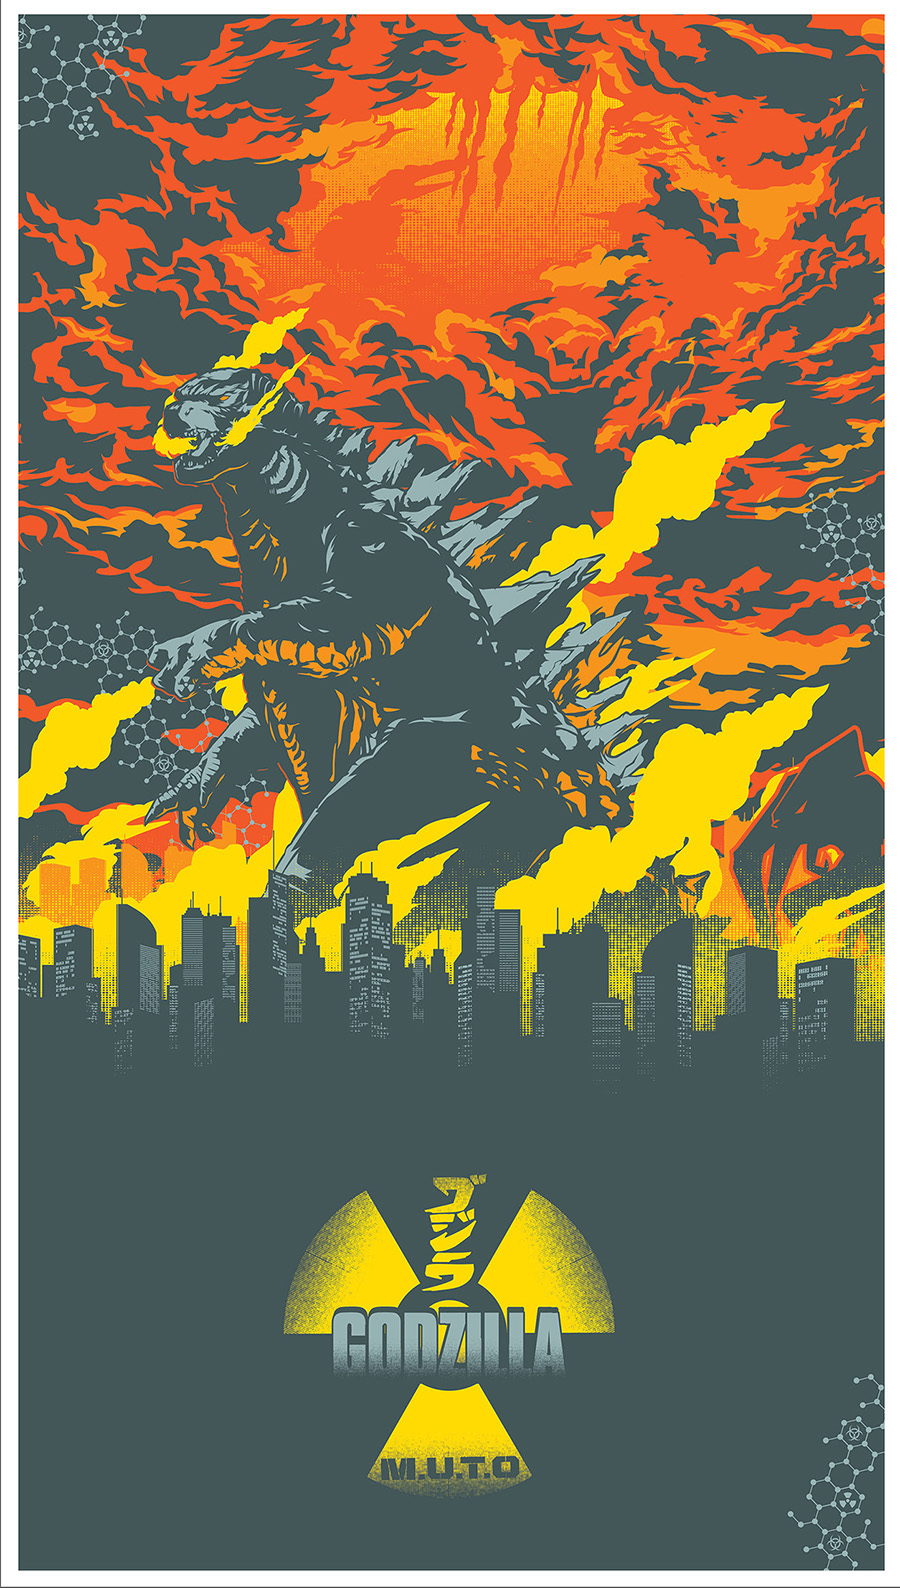 godzilla Poster Posse blurppy Legendary Pictures Poster Design Project 7